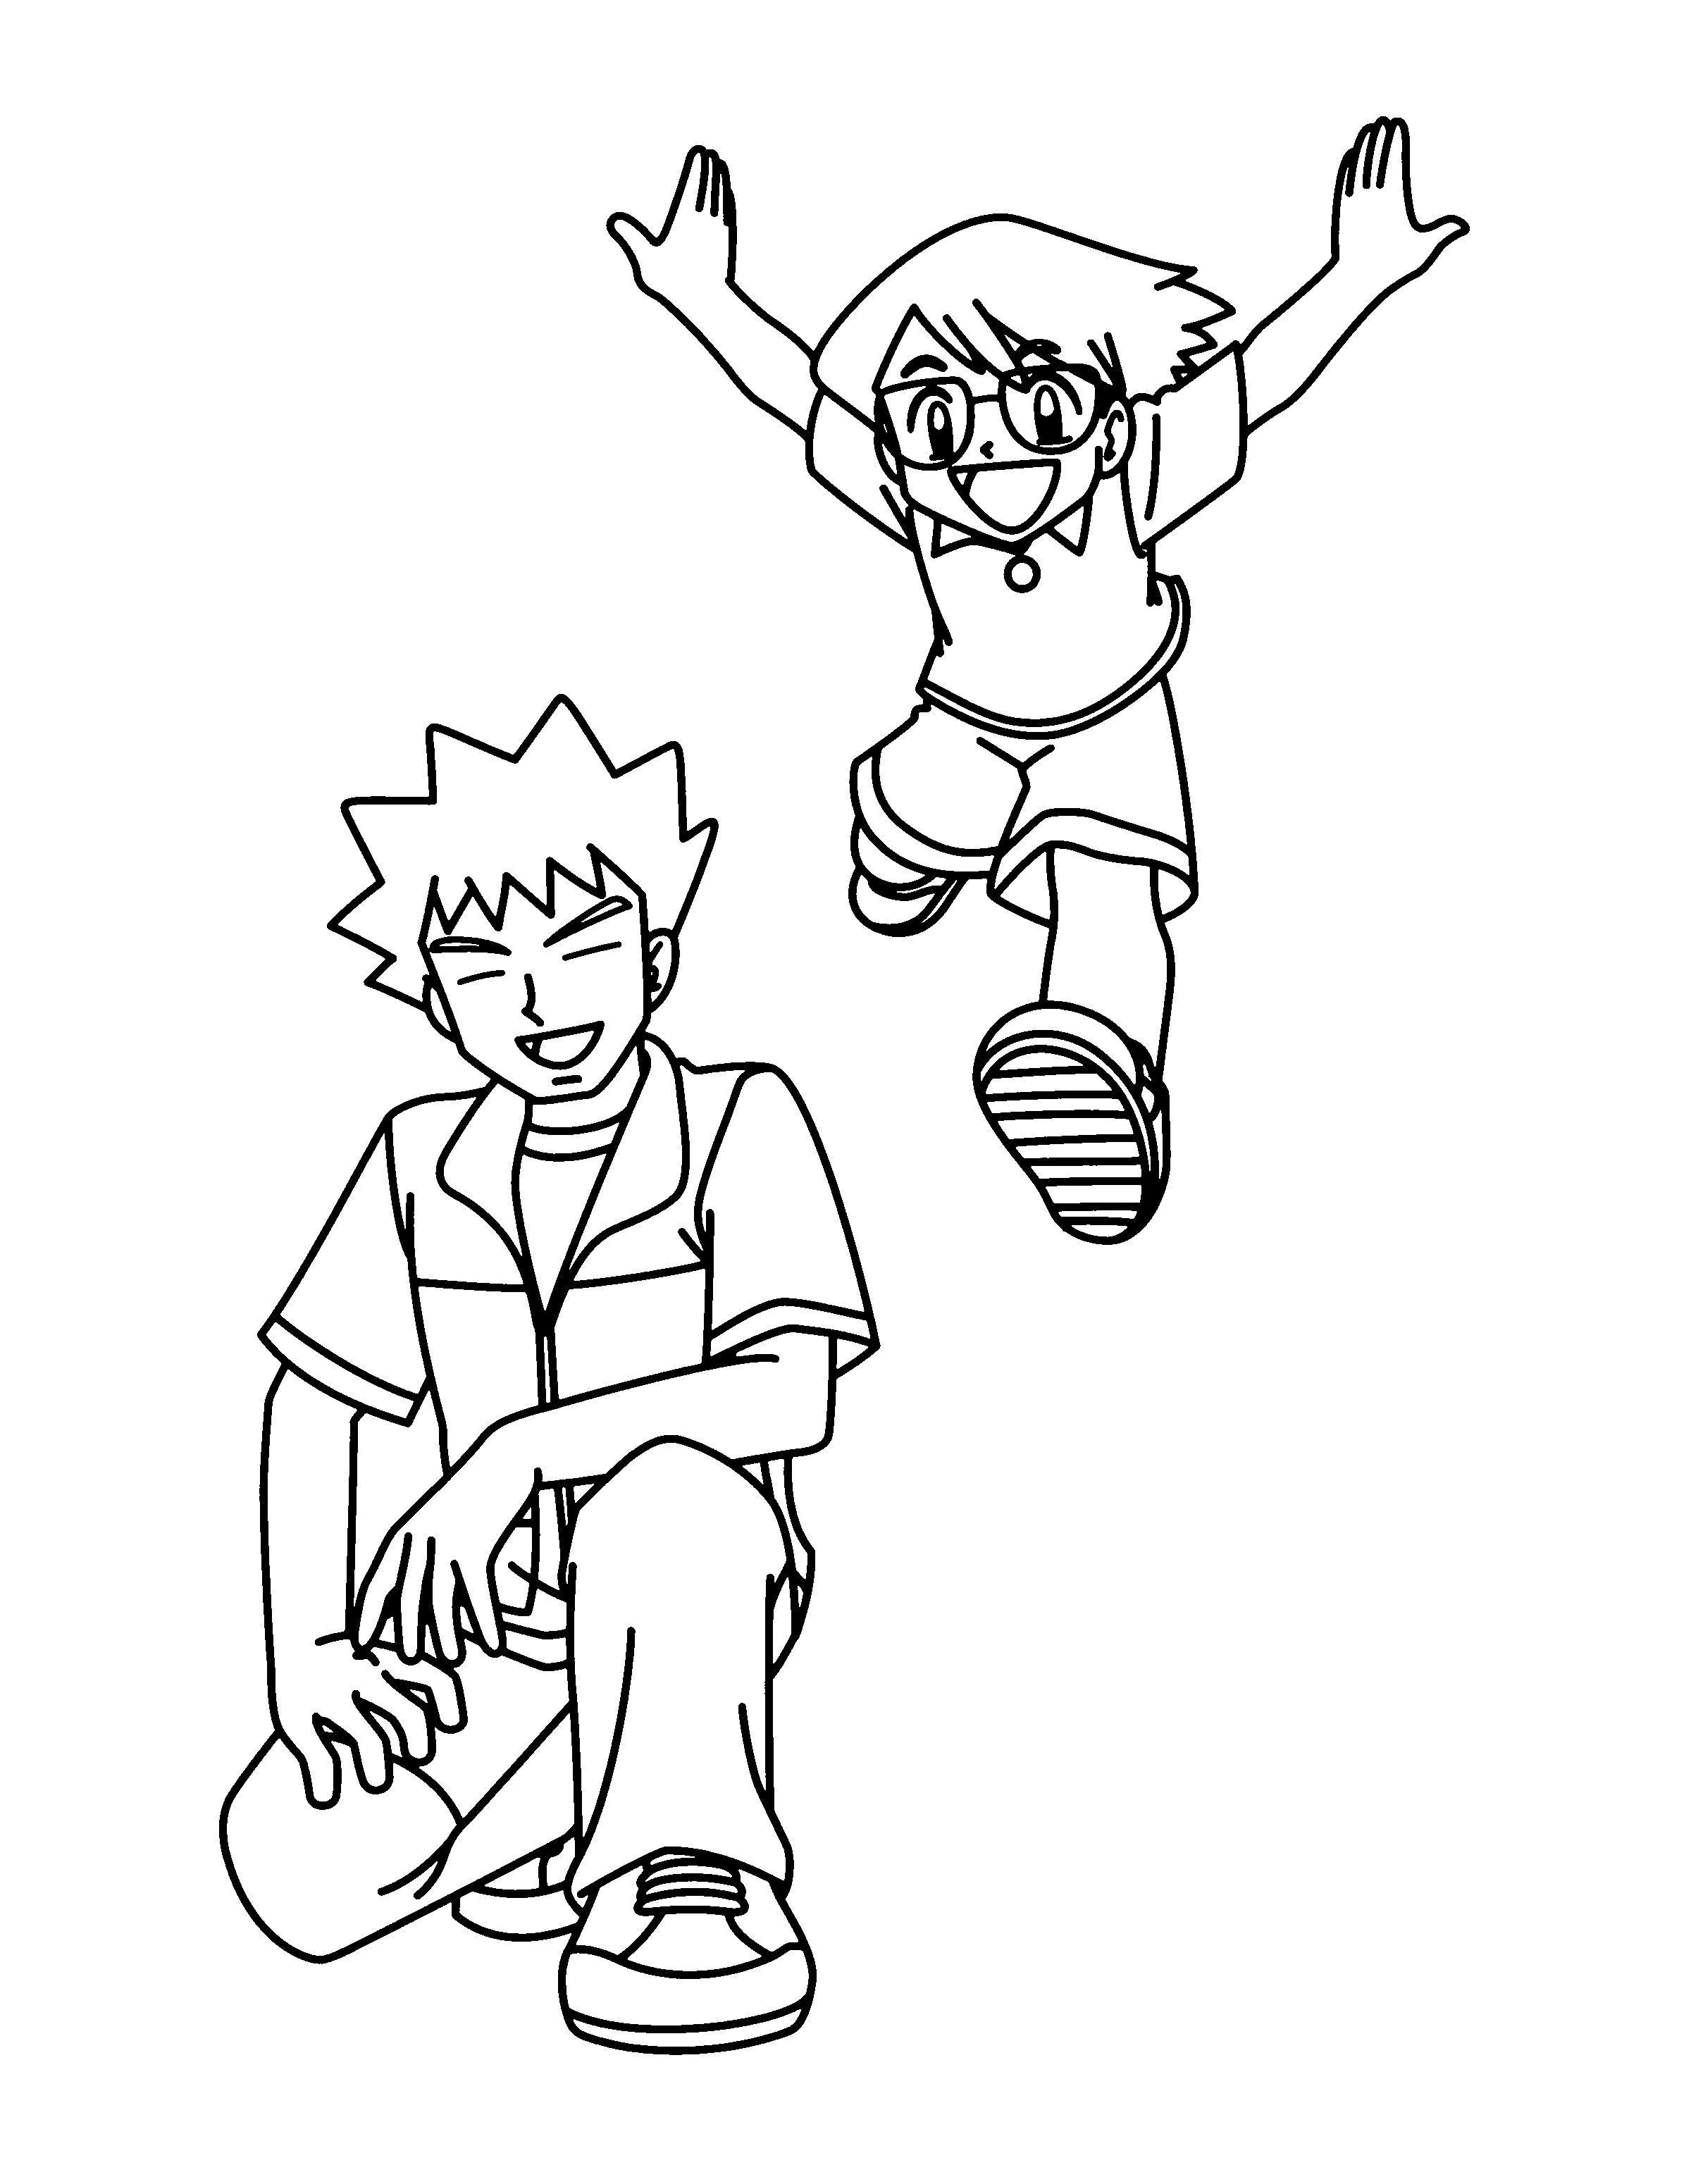 Pierre And Max coloring page